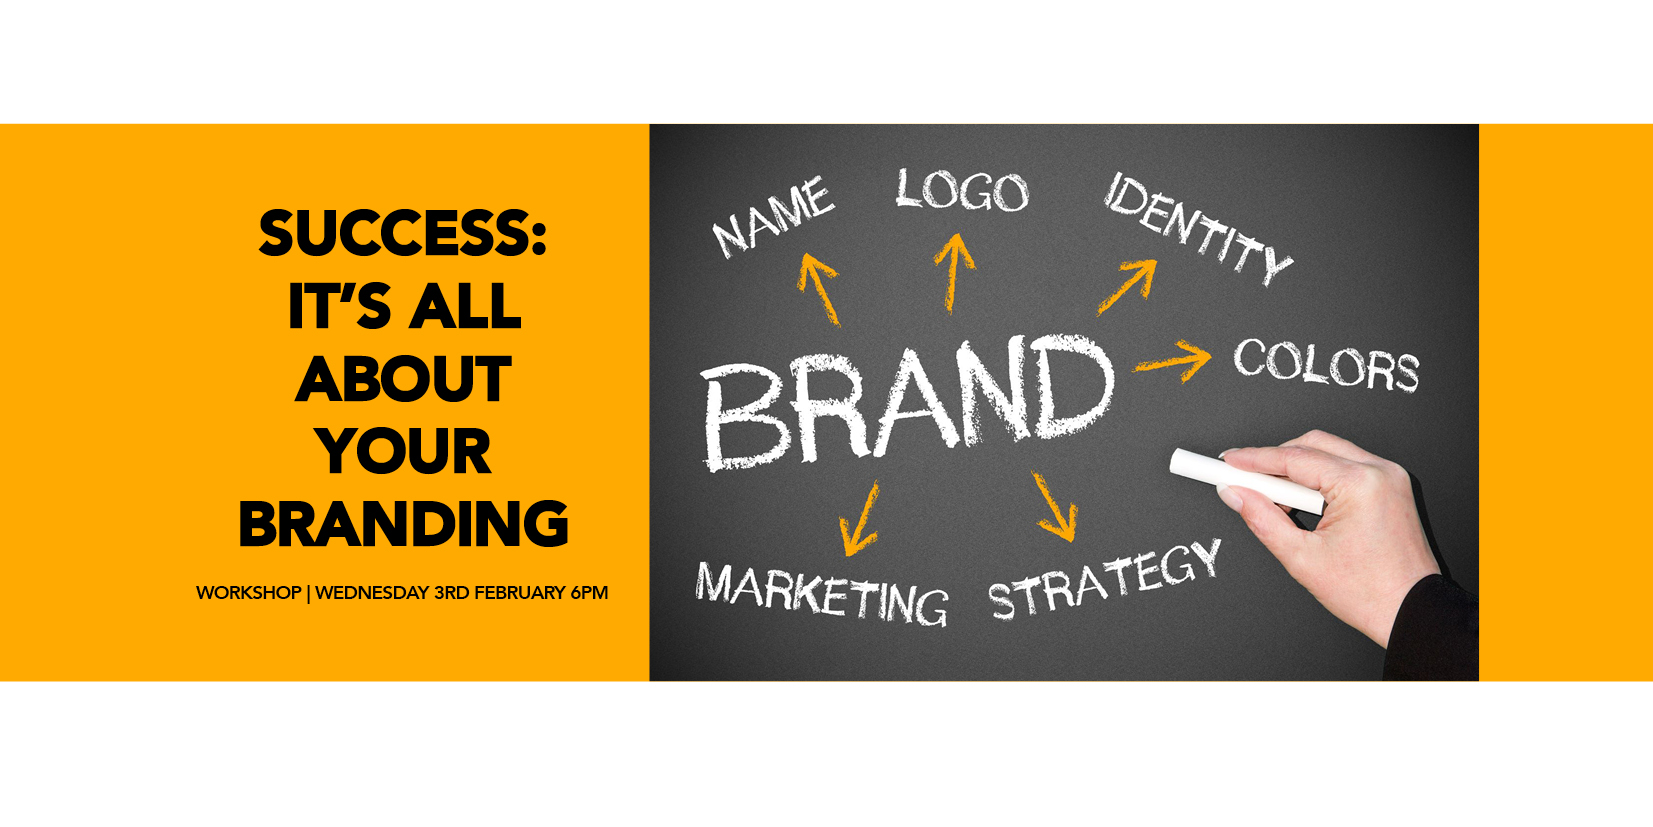 Success: It's All About Your Branding